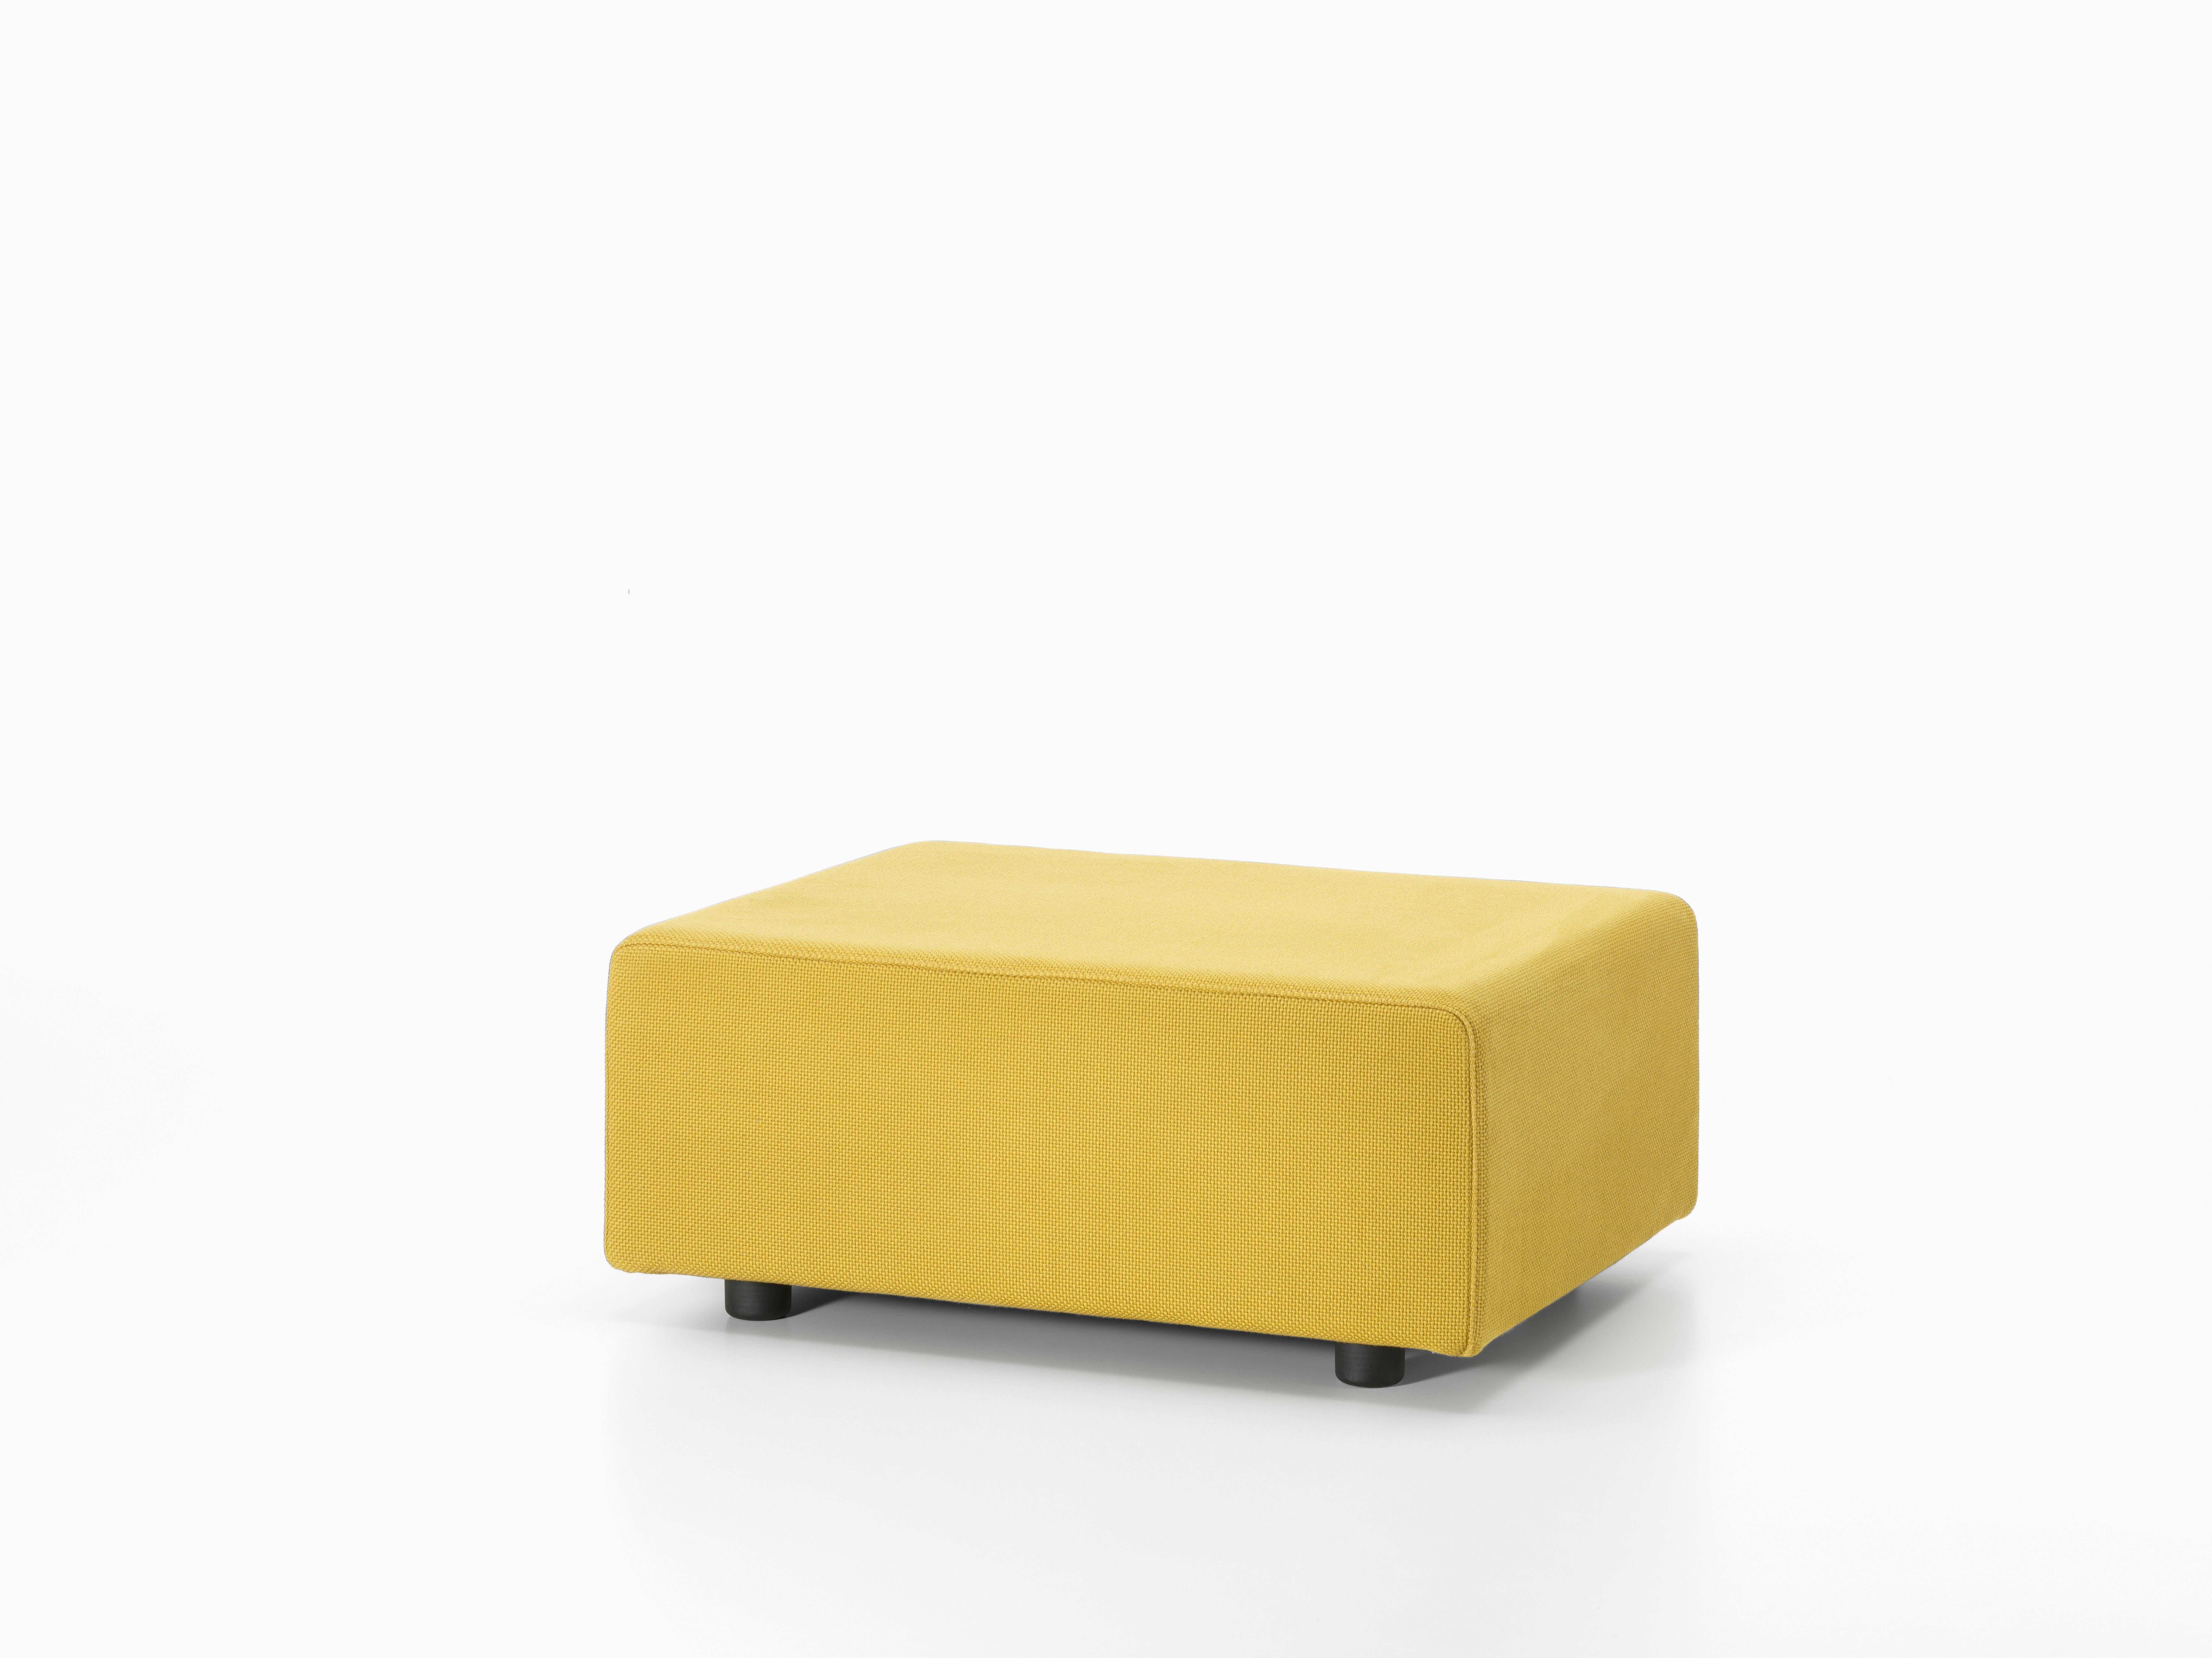 These items are currently only available in the United States.

The ottoman is a flexible element that can be optionally used as a side platform to extend the horizontal surface of the Polder Sofa. Positioned perpendicular to the sofa, it forms a